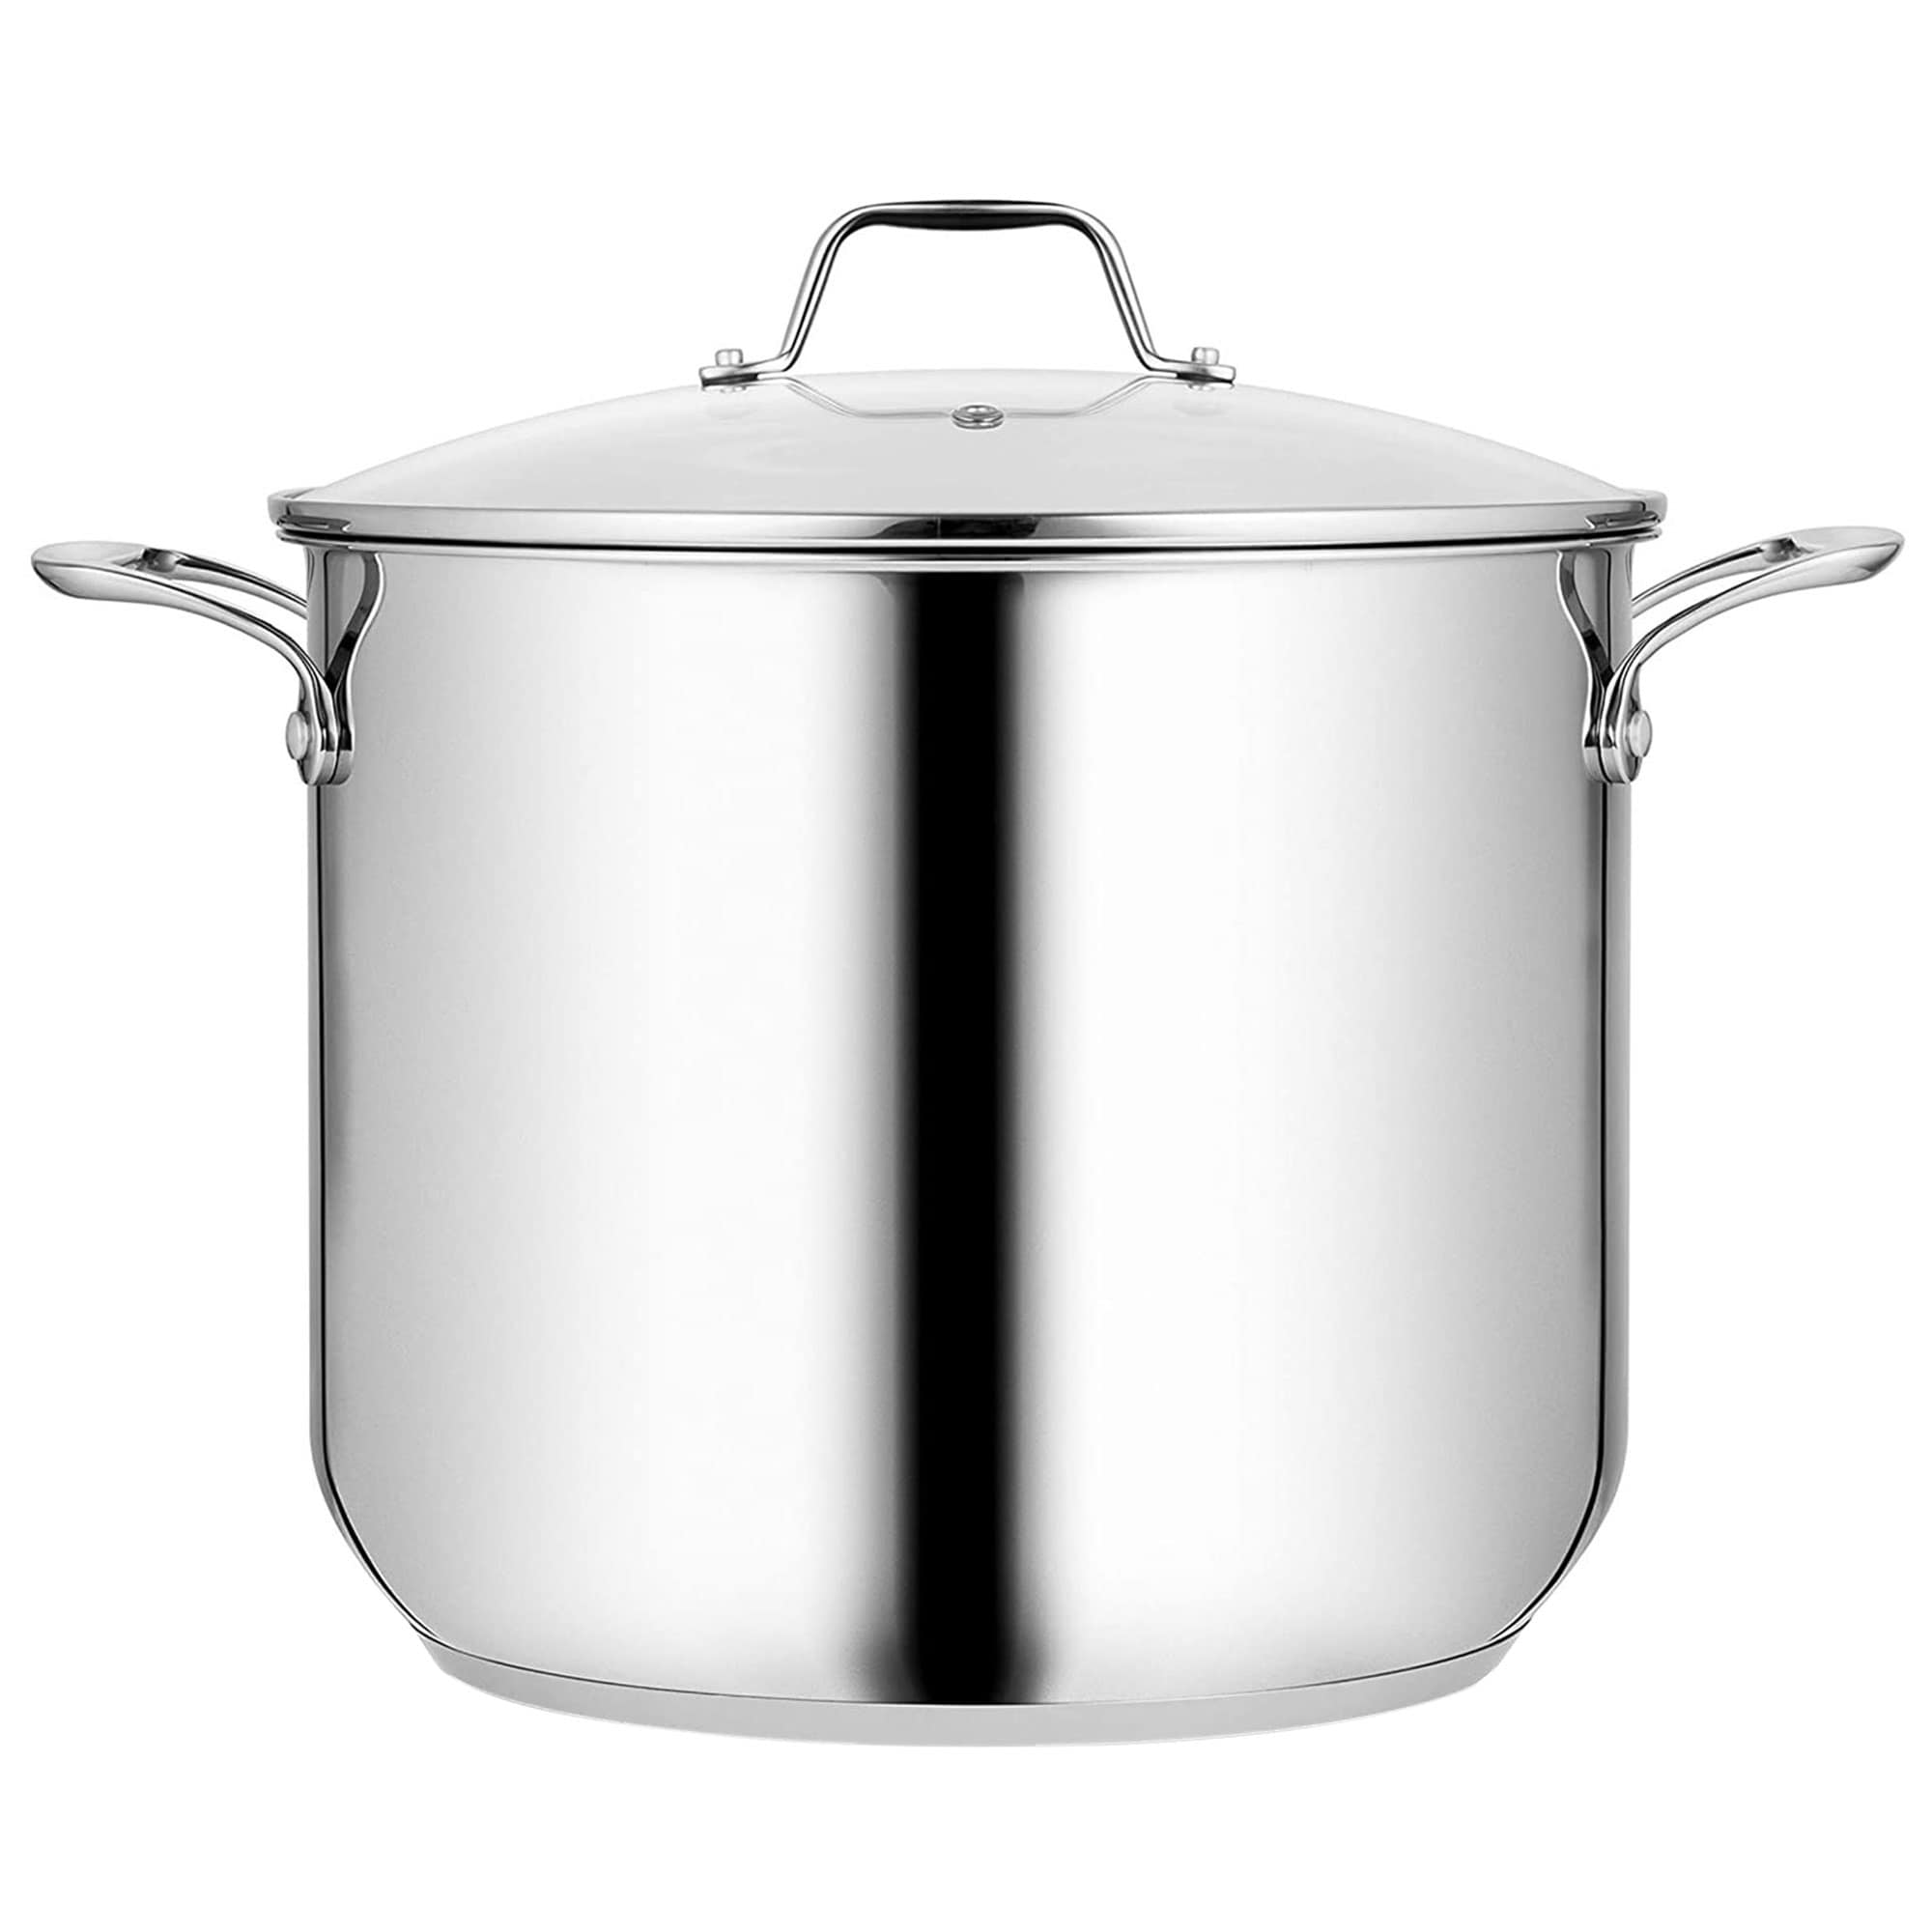 Bergner Essentials 2.6-Quart Stainless Steel Soup Pot with Tempered Glass Lid and Steamer Insert - Silver - 2.6 Quart